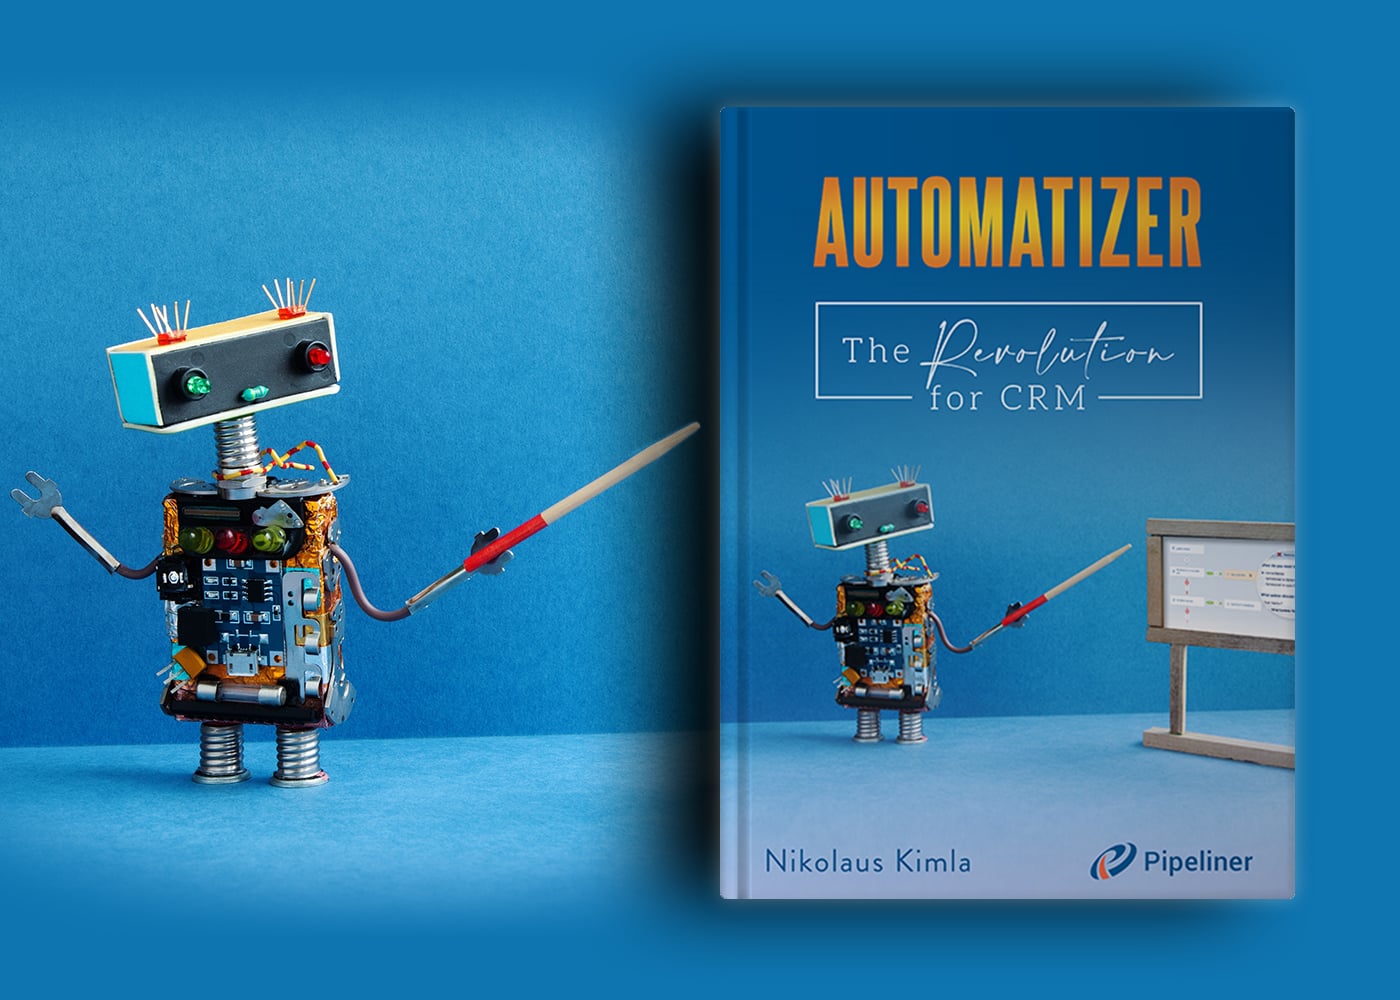 Automatizer the revolution for CRM